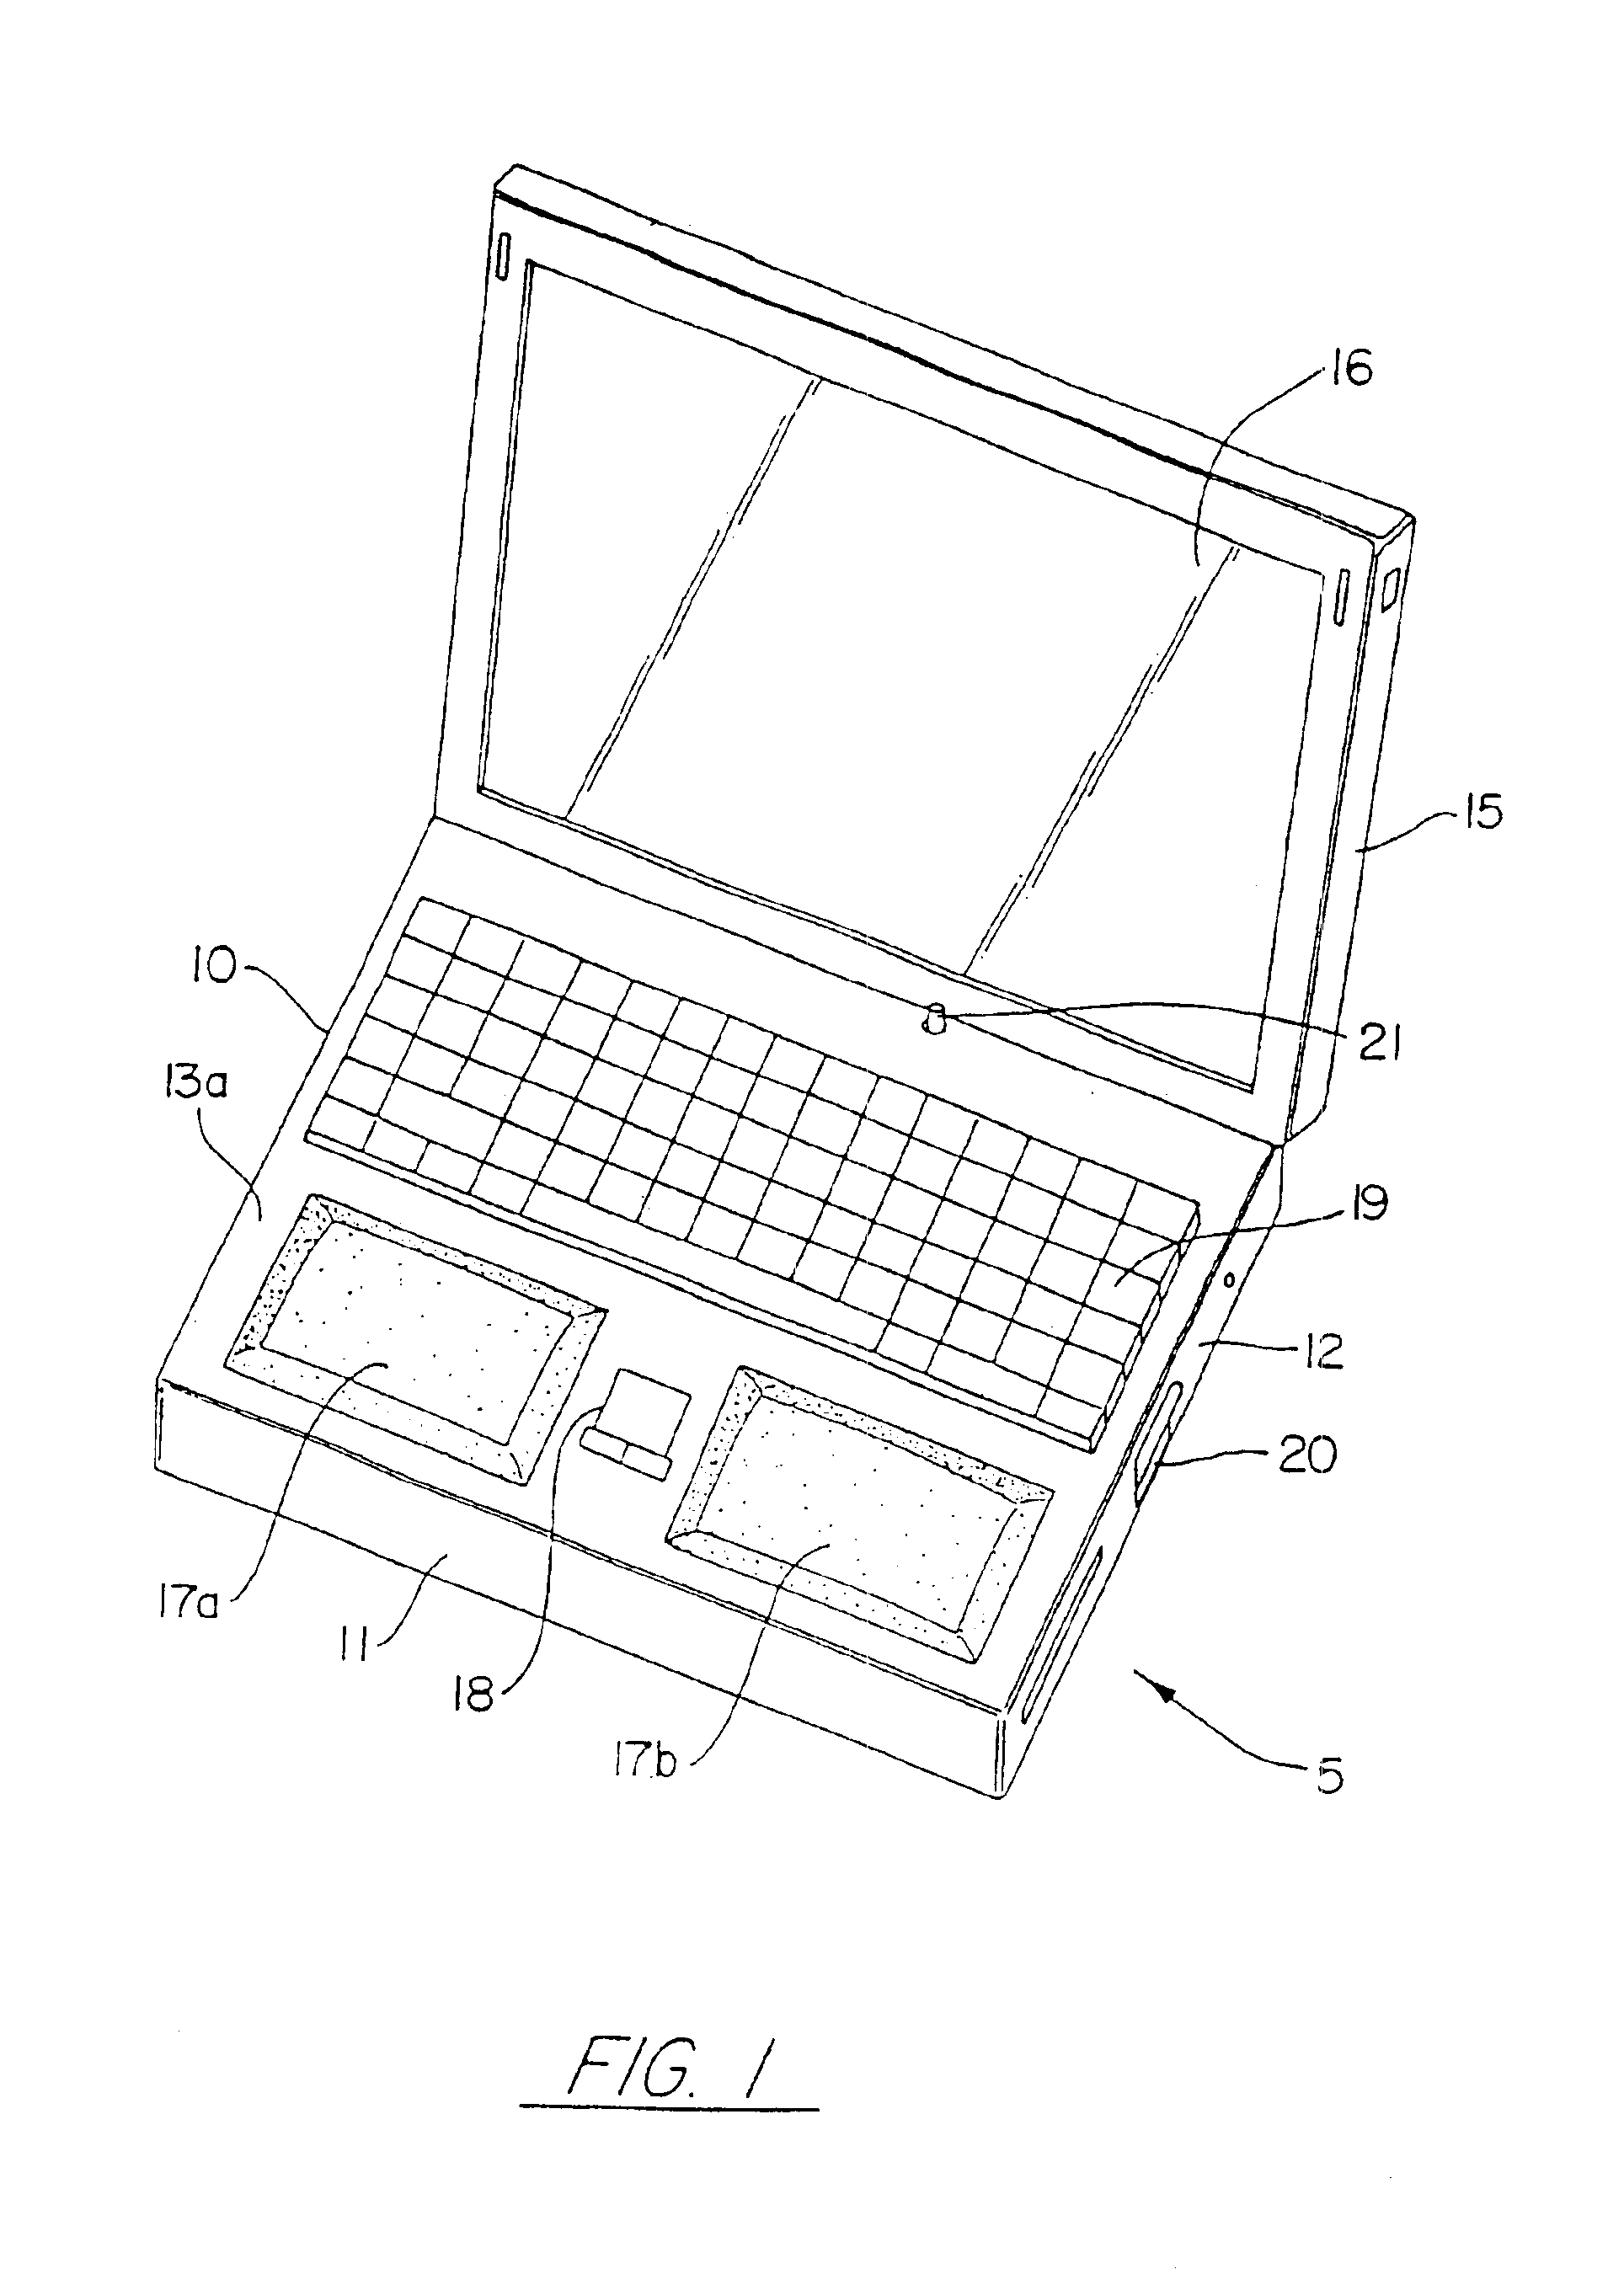 Notebook computer with wrist support